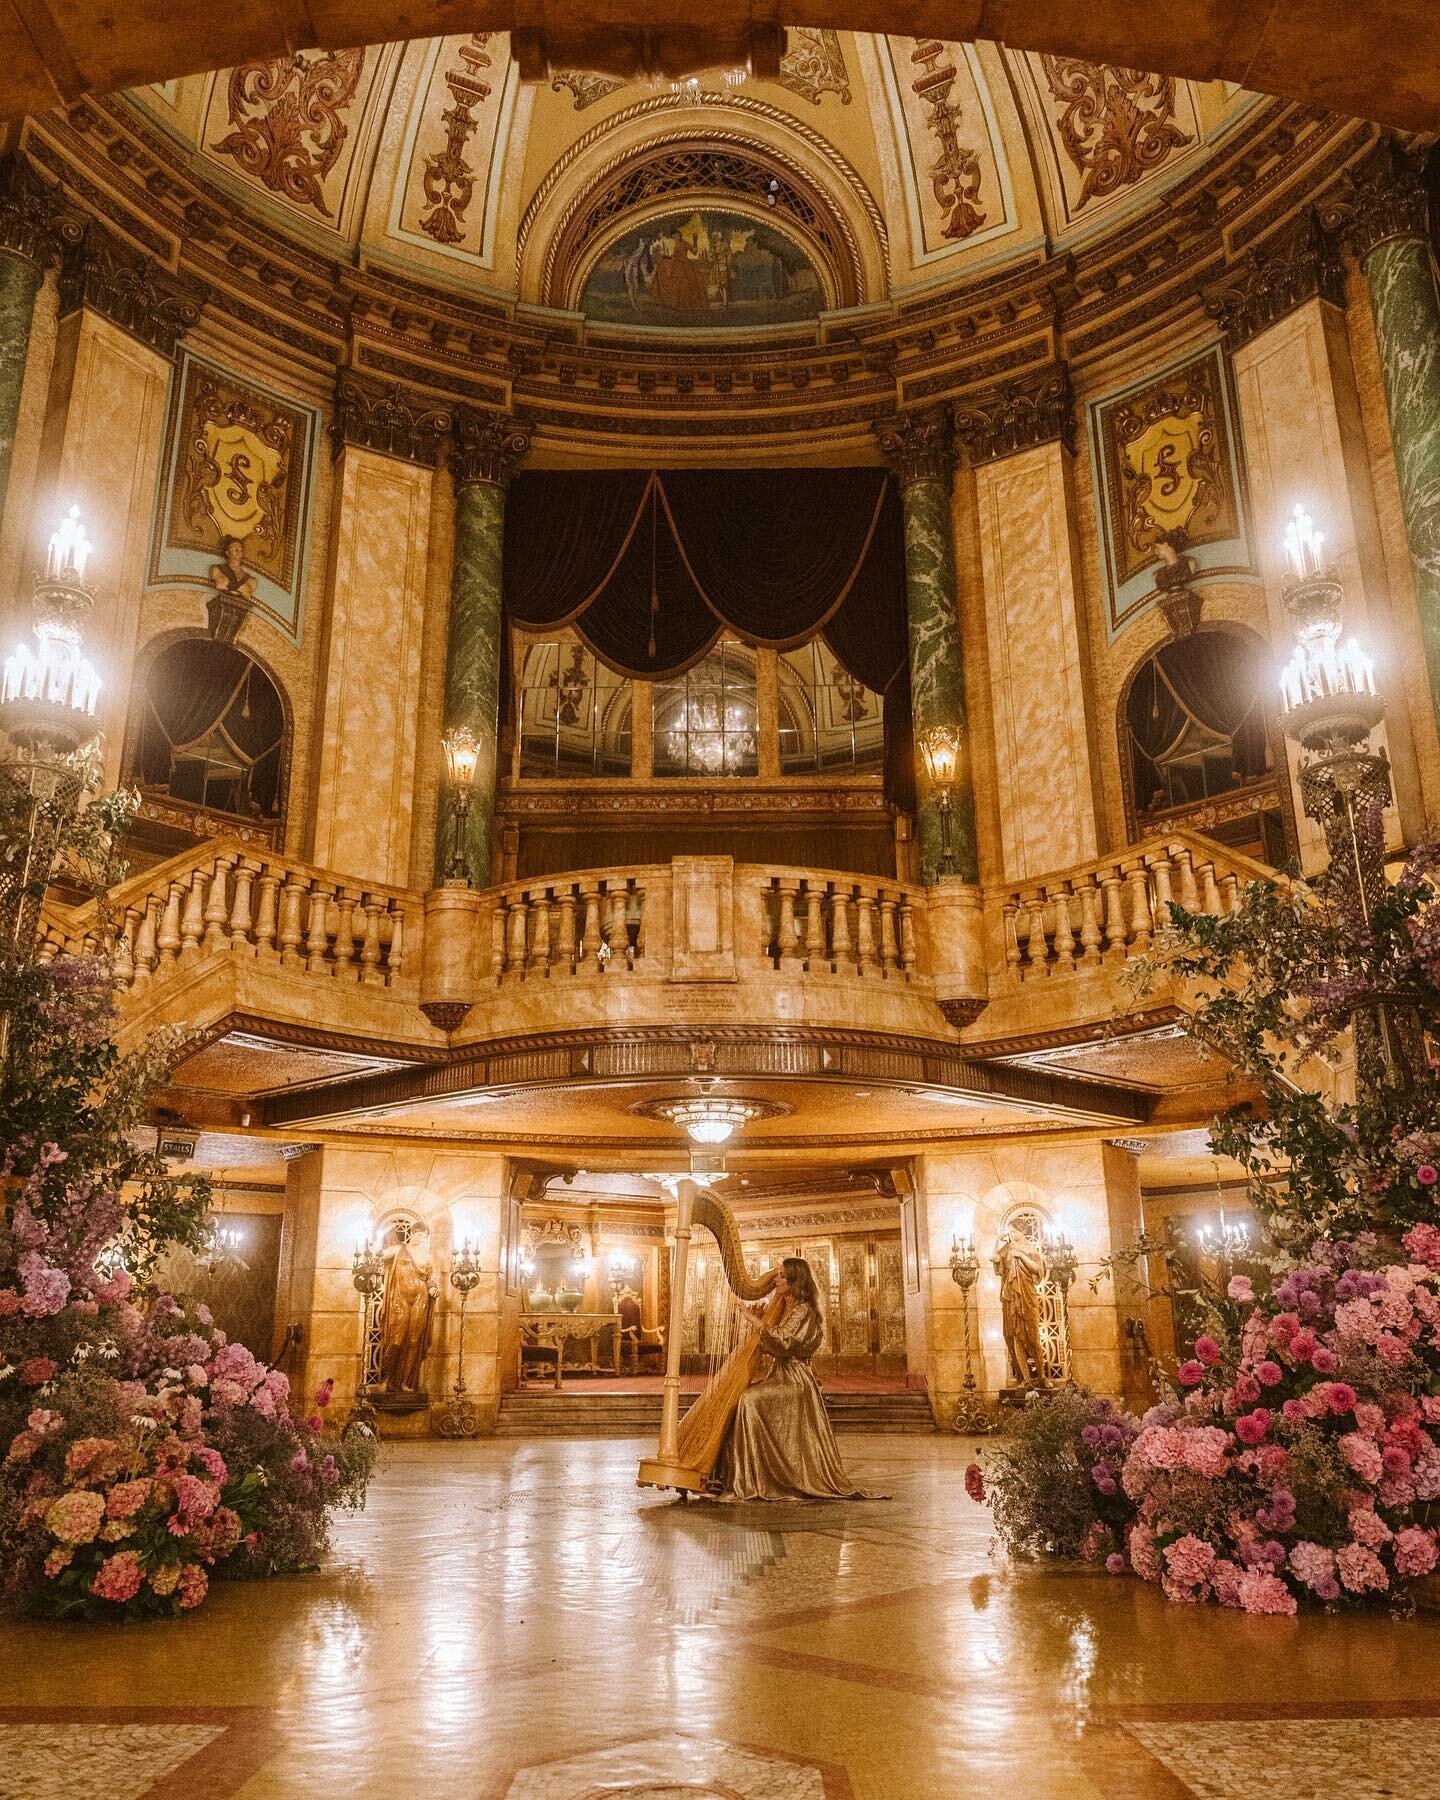 The stunning entrance.

Creative Director &amp; Stylist: The Bride &amp; Groom @theresemoussa @ramzeychoker
Floral Creative Direction: @azariade__ x @johnemmanuelfloralevents
Floral Execution: @azariade__
Photography &amp; Videography: @amaraweddings